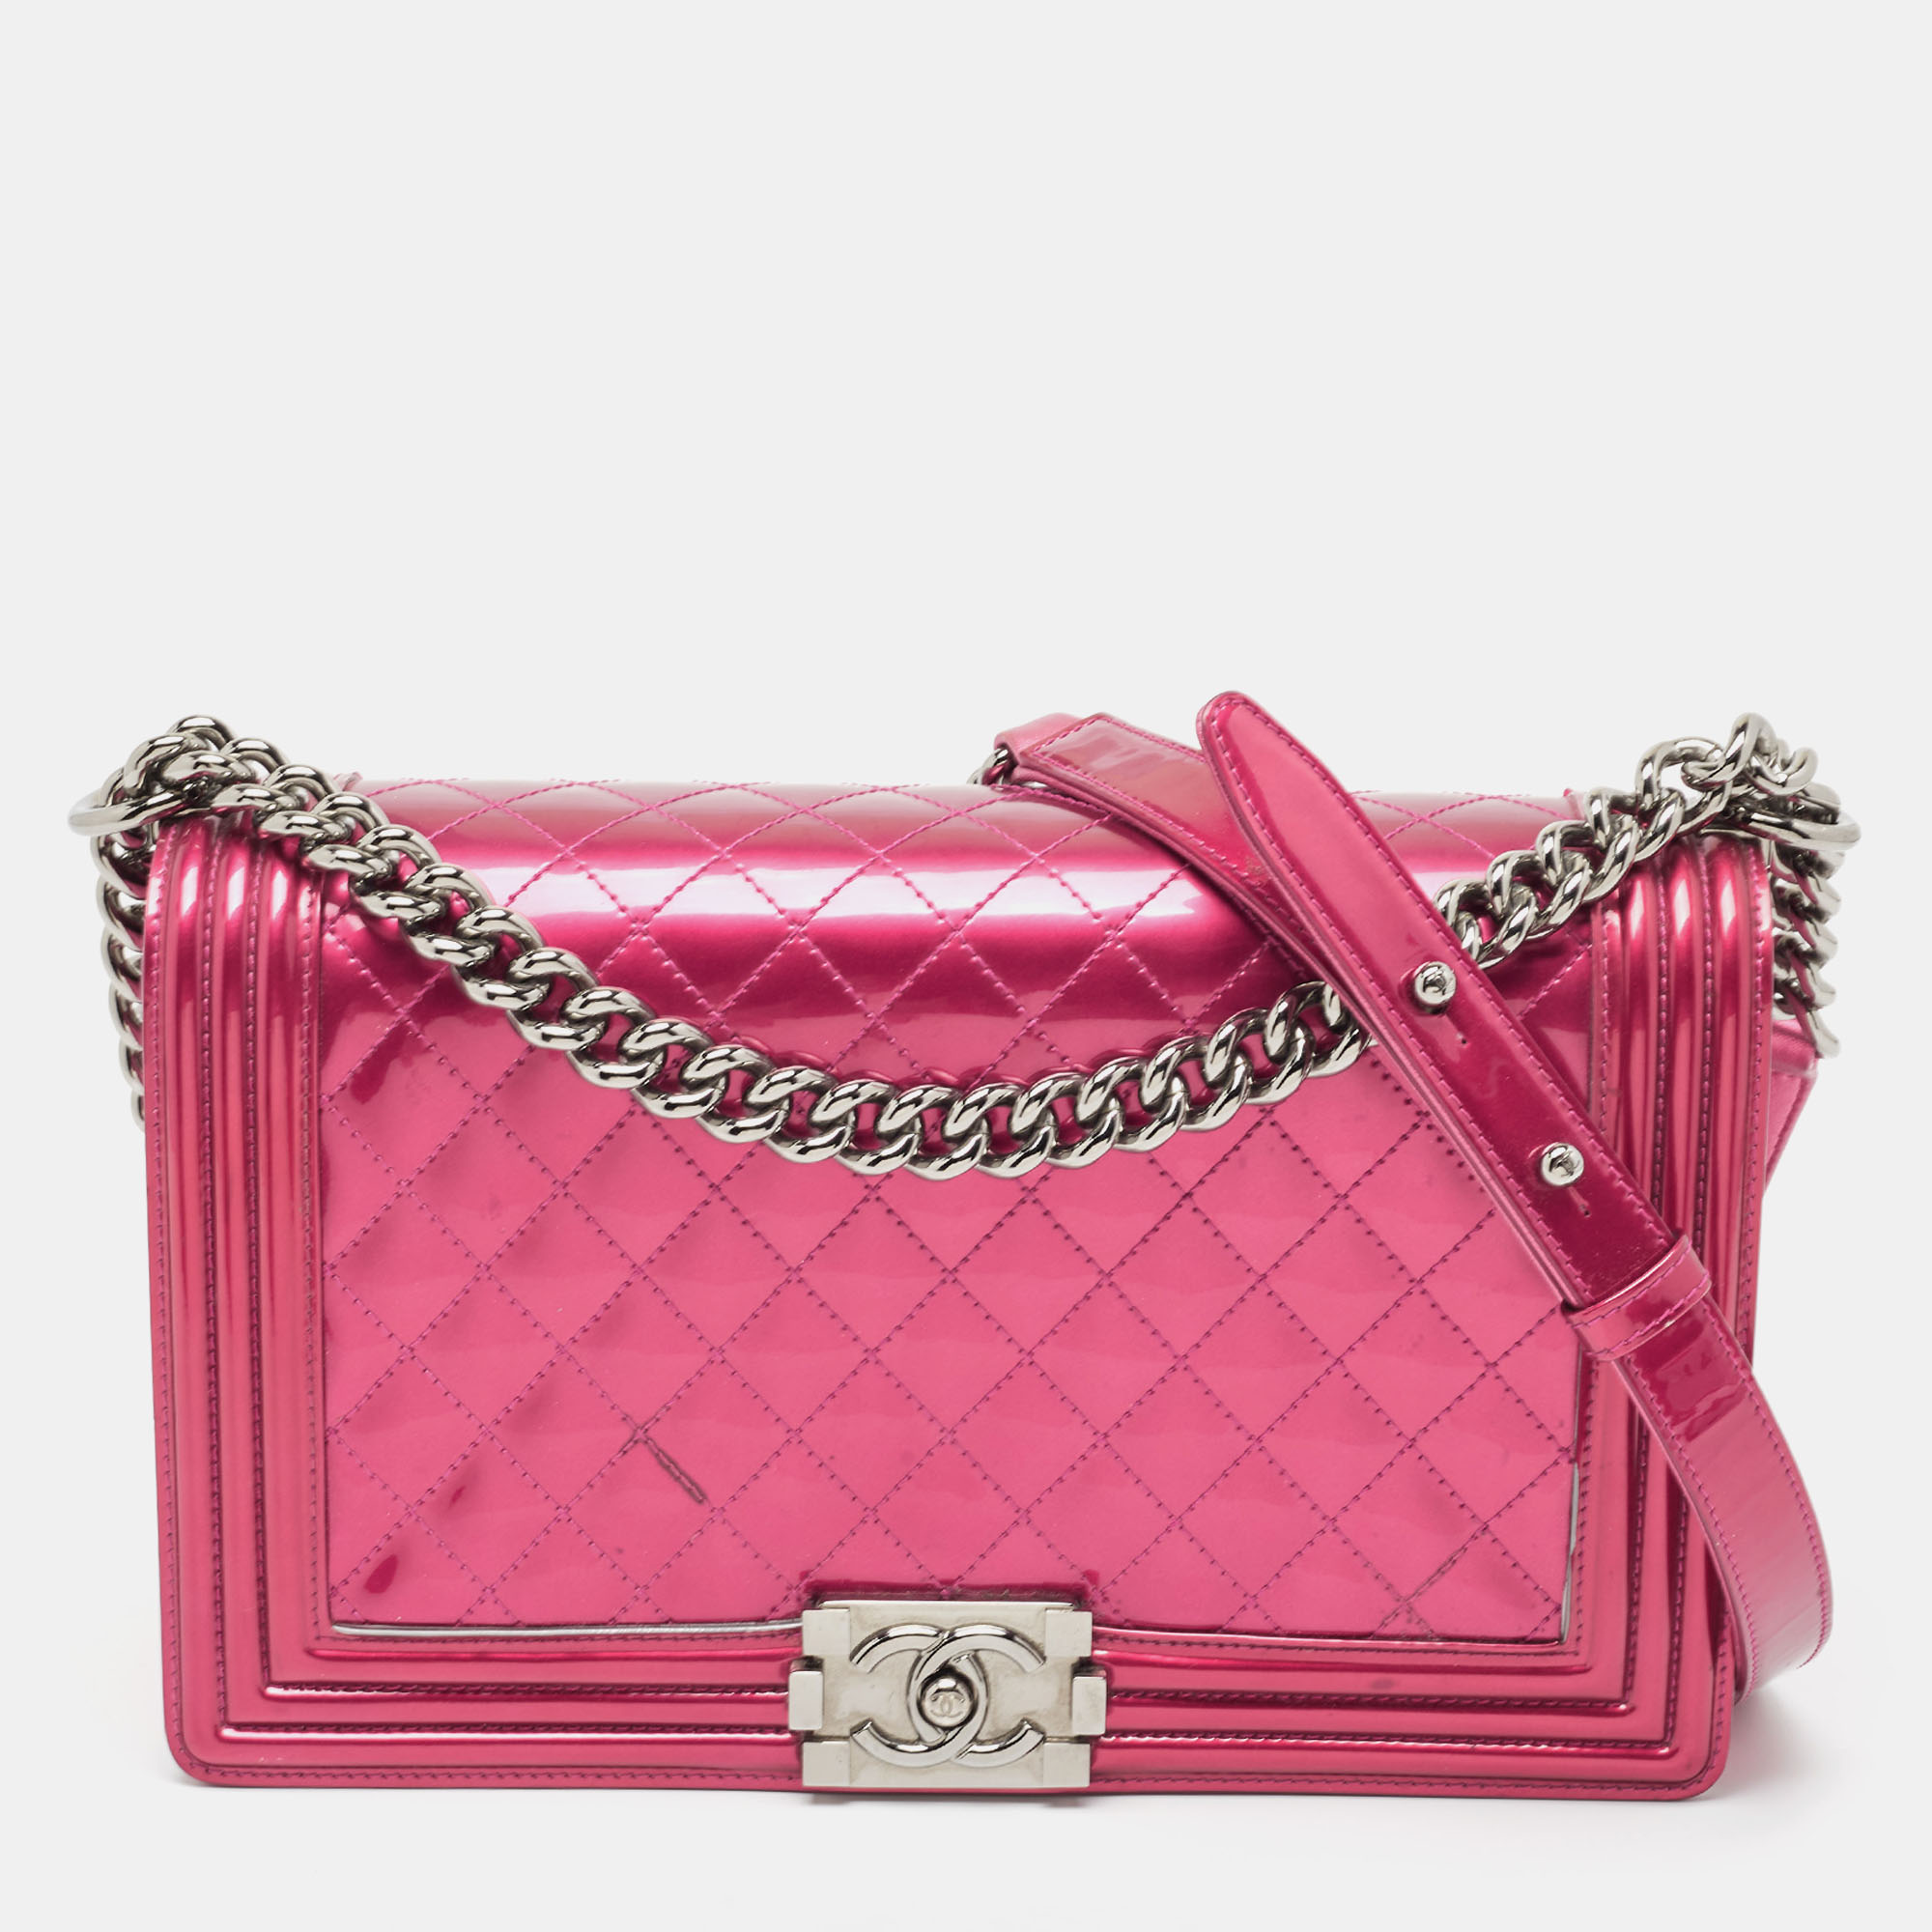 Pre-owned Chanel Pink Quilted Patent Leather New Medium Boy Flap Bag